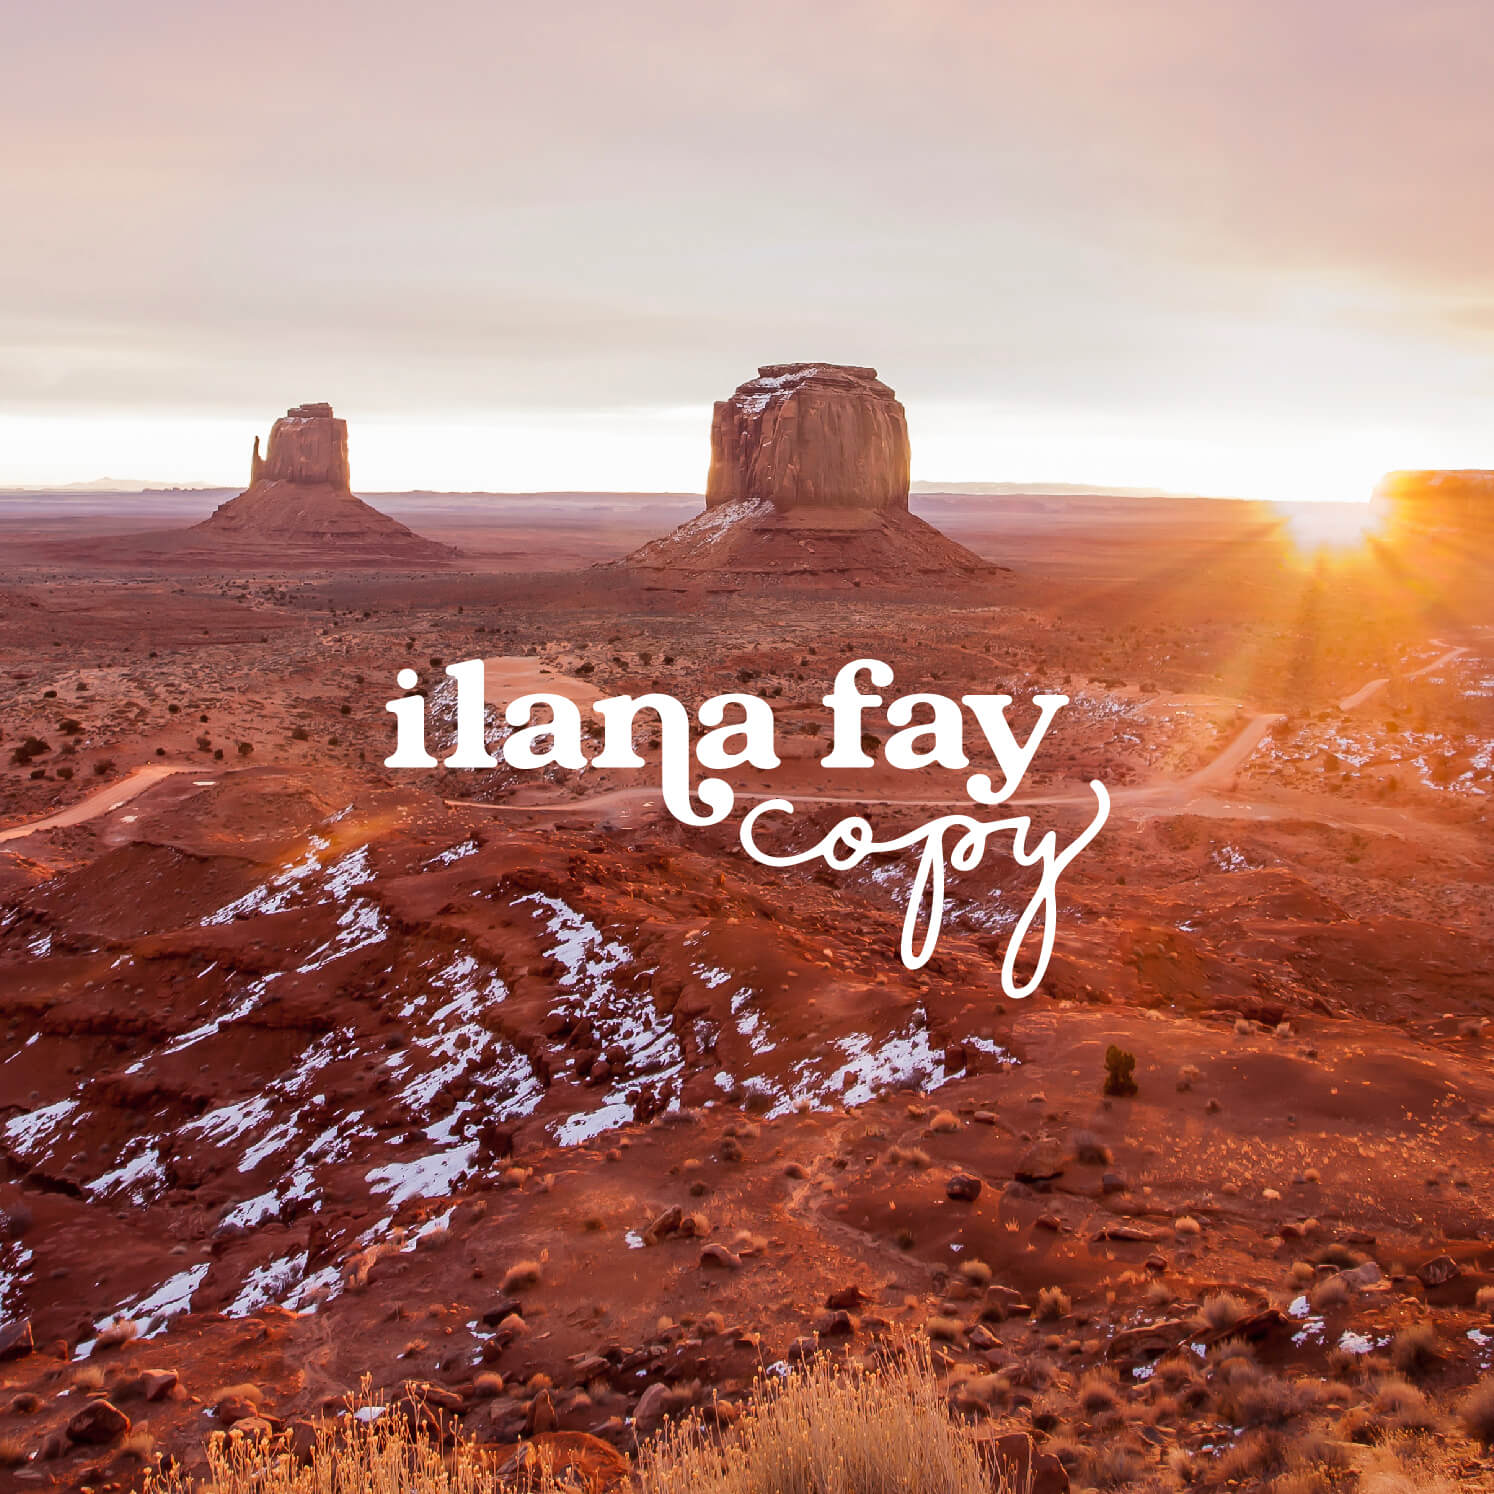 Ilana Fay Copy, copywriter for outdoors brands, graphic logo design reading ilana fay copy overlaid on a photograph of mesas in the desert